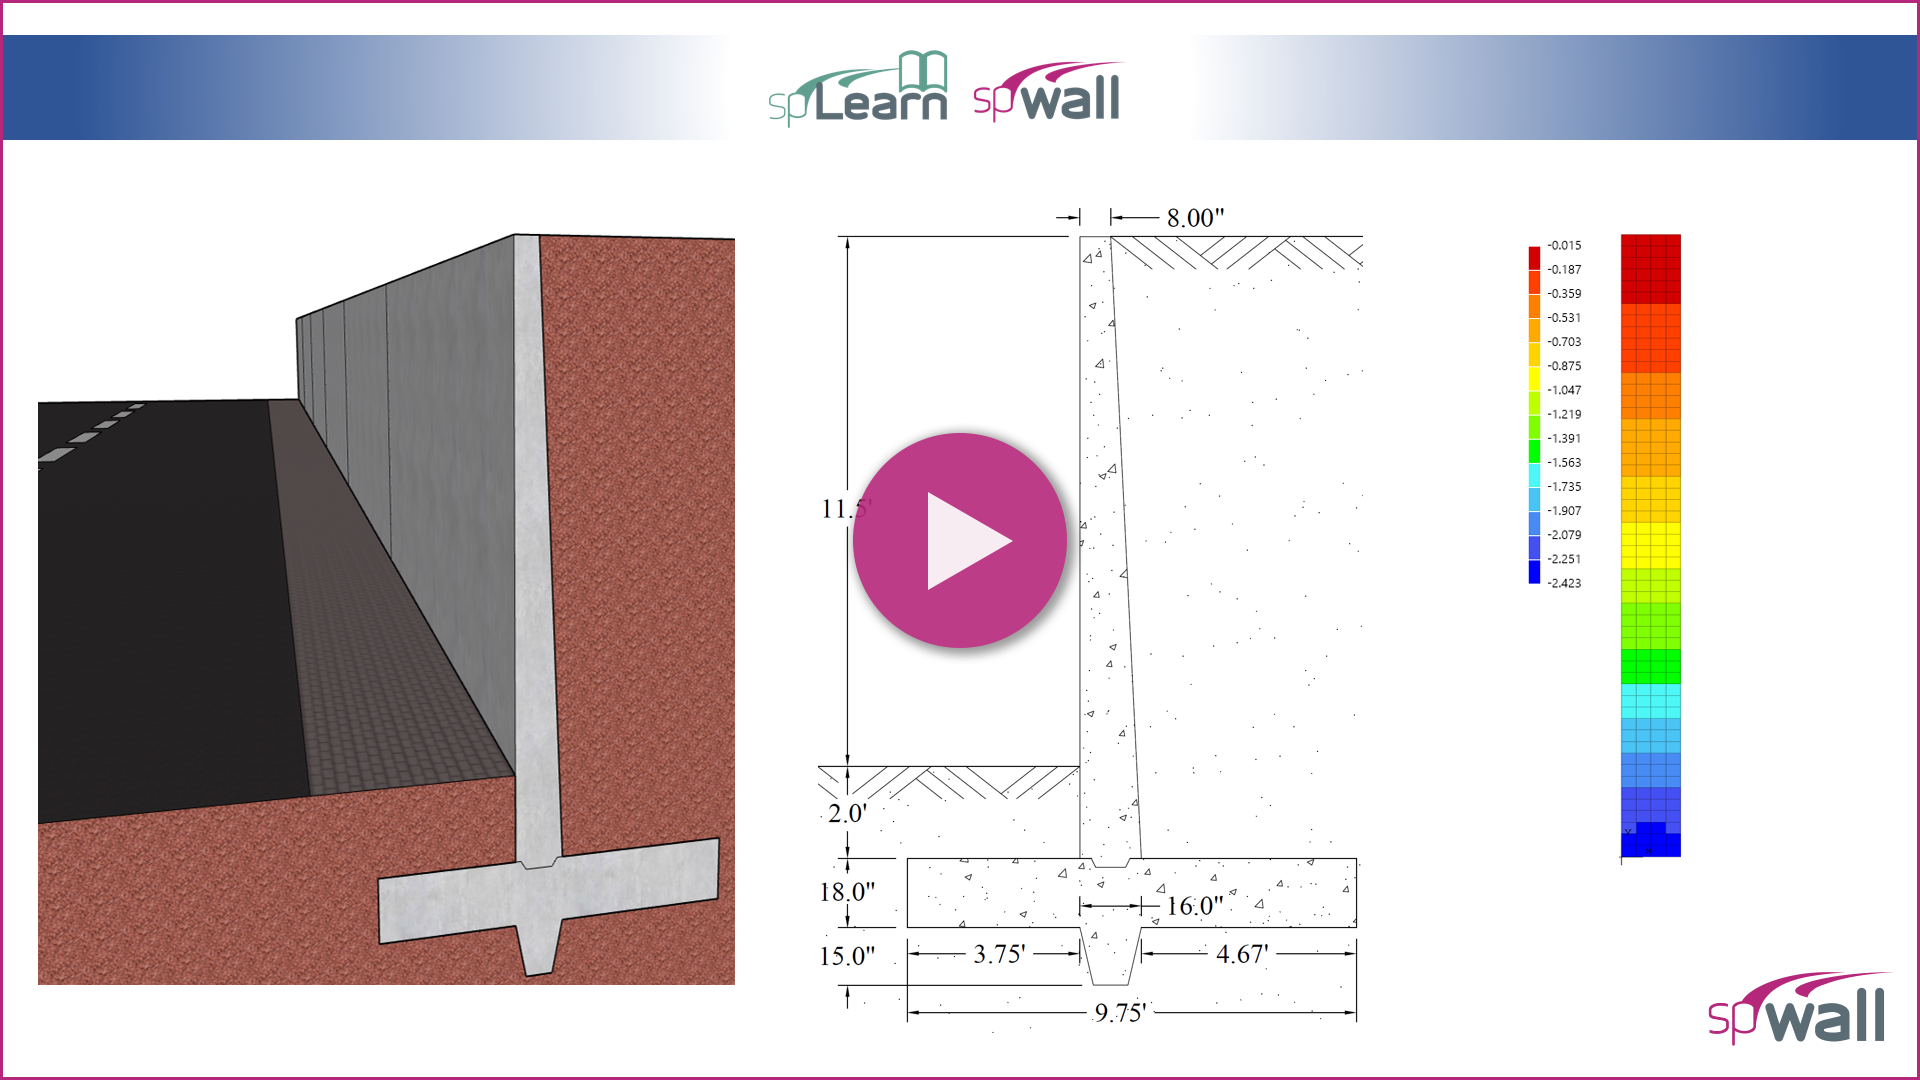 How to Analyze and Design a Reinforced Concrete Tapered Cantilever Retaining Wall